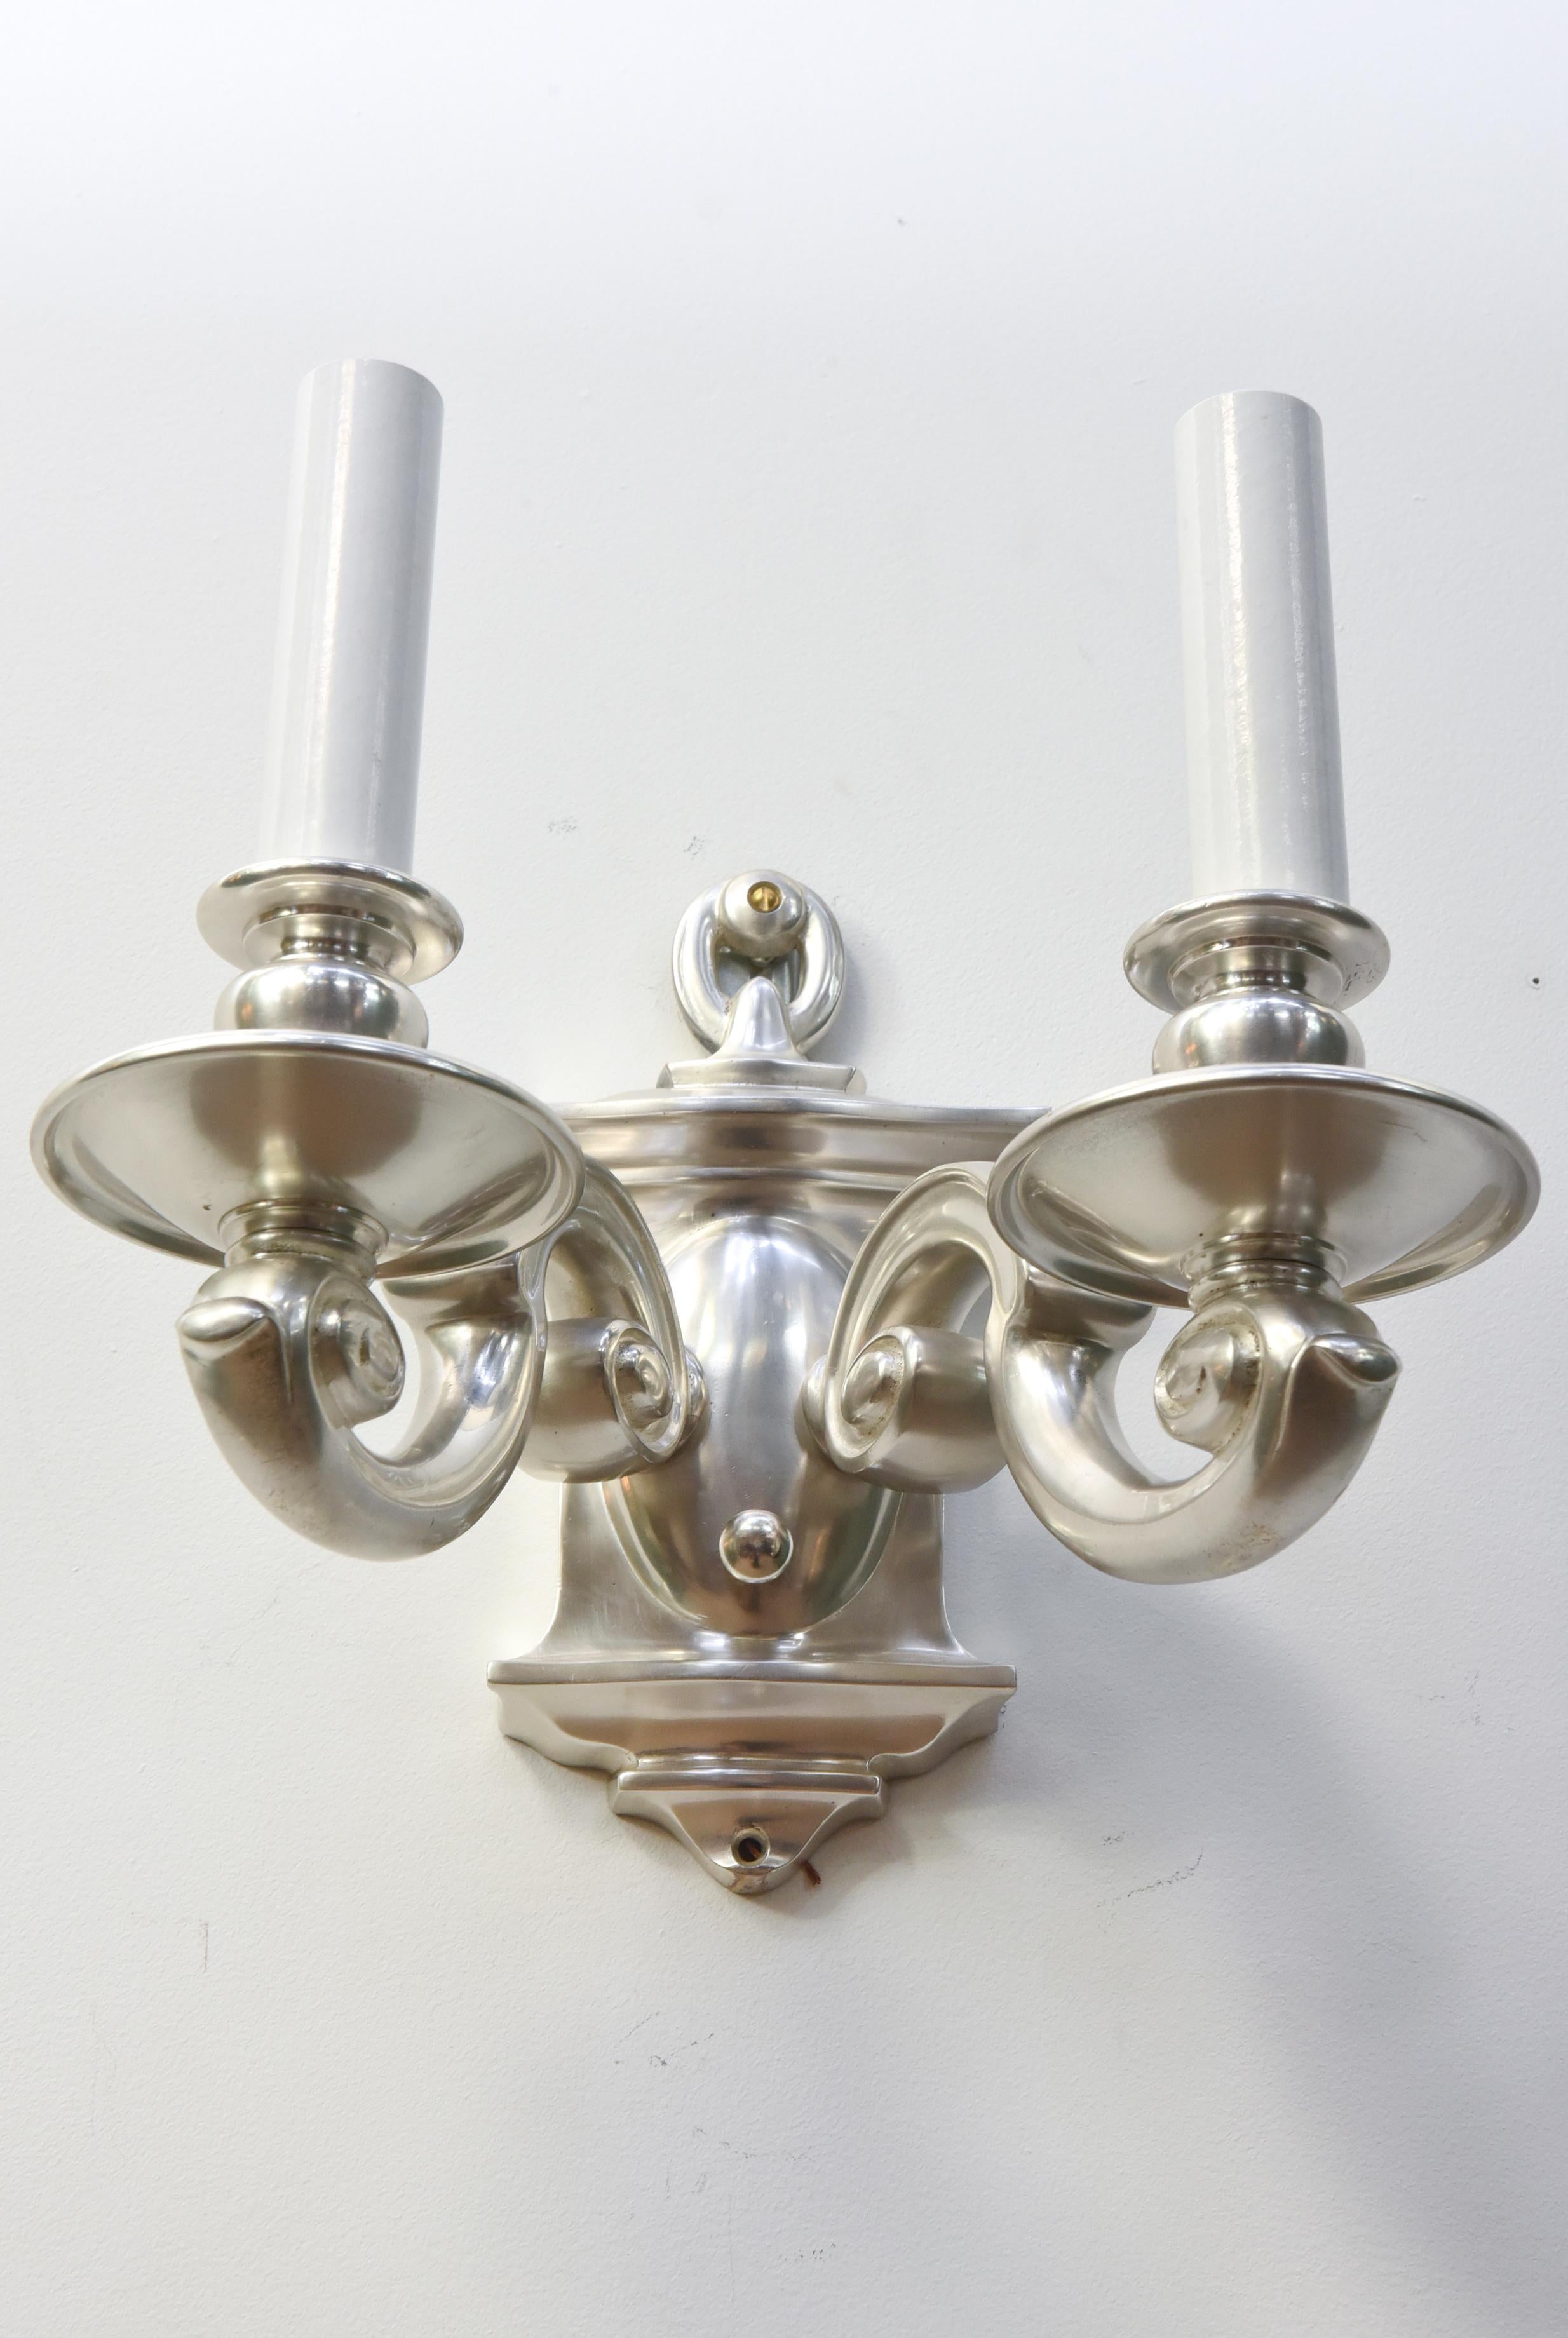 Heavy silver sconces with two arms. Rounded rococo style. American, C. 1910. Have been polished, protected, and rewired. ready for installation.